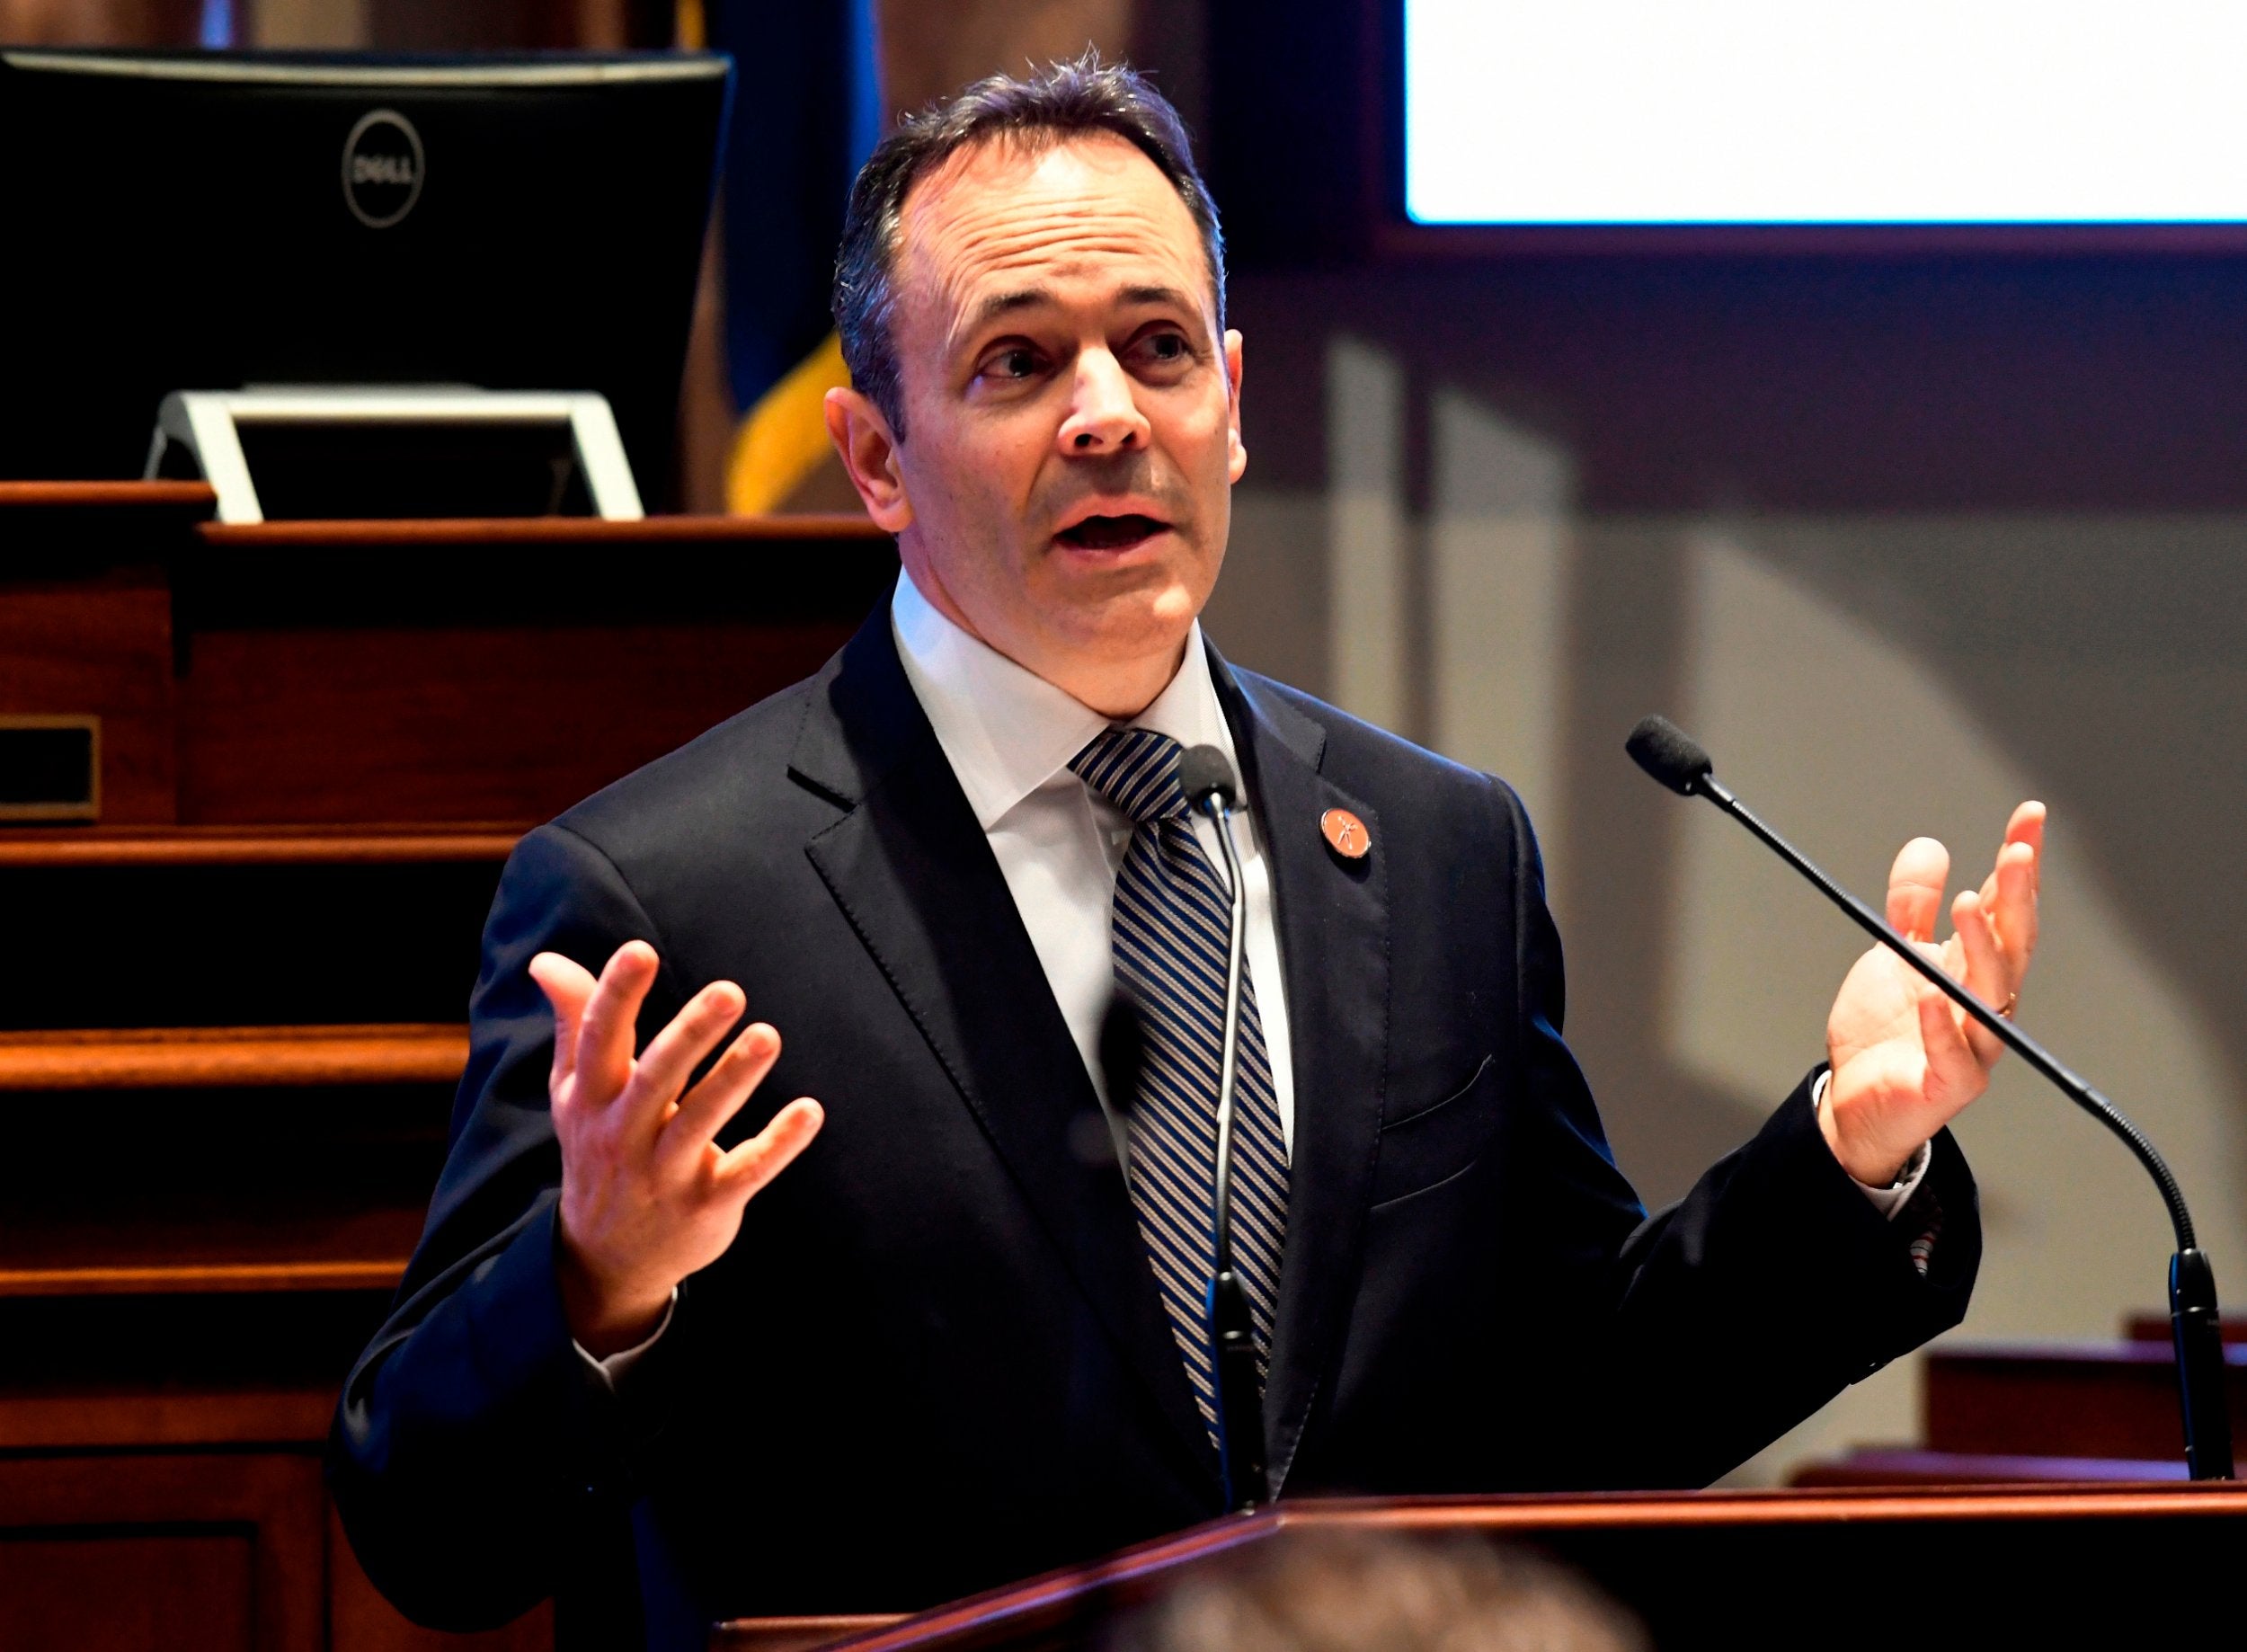 The Kentucky governor has green lit a plan that would cut dental and vision insurance in Kentucky